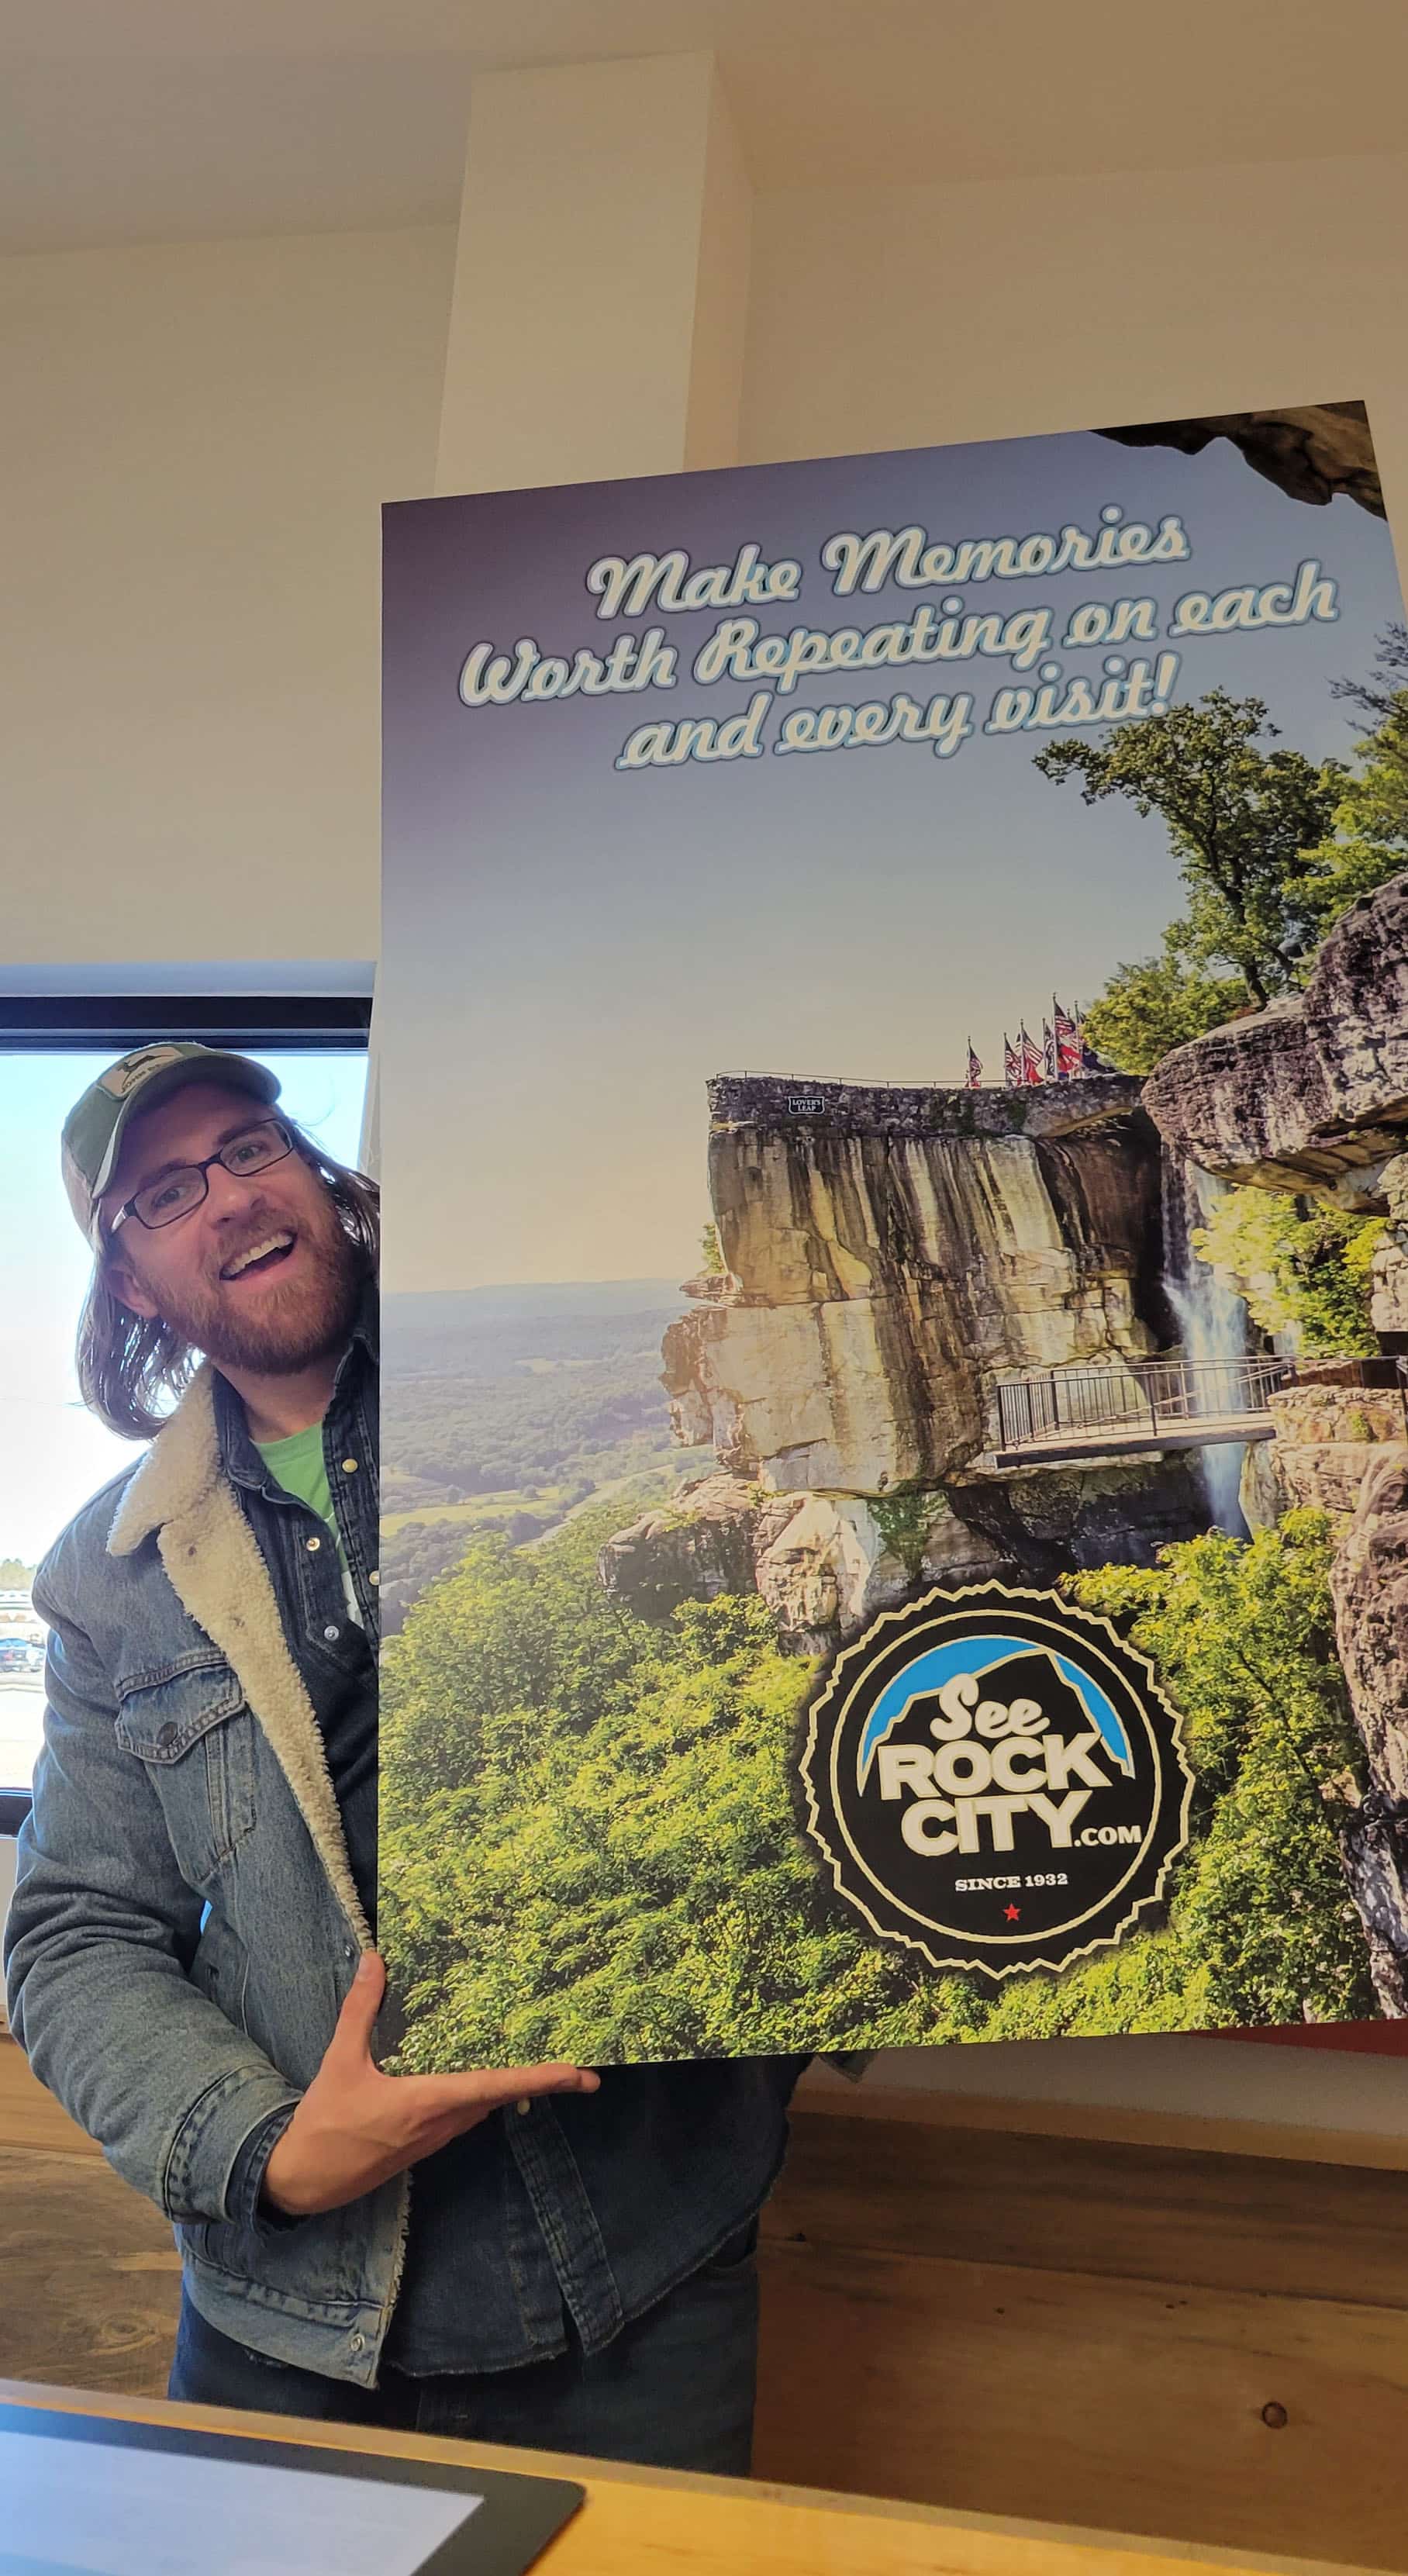 Man holding a sign promoting Rock City.